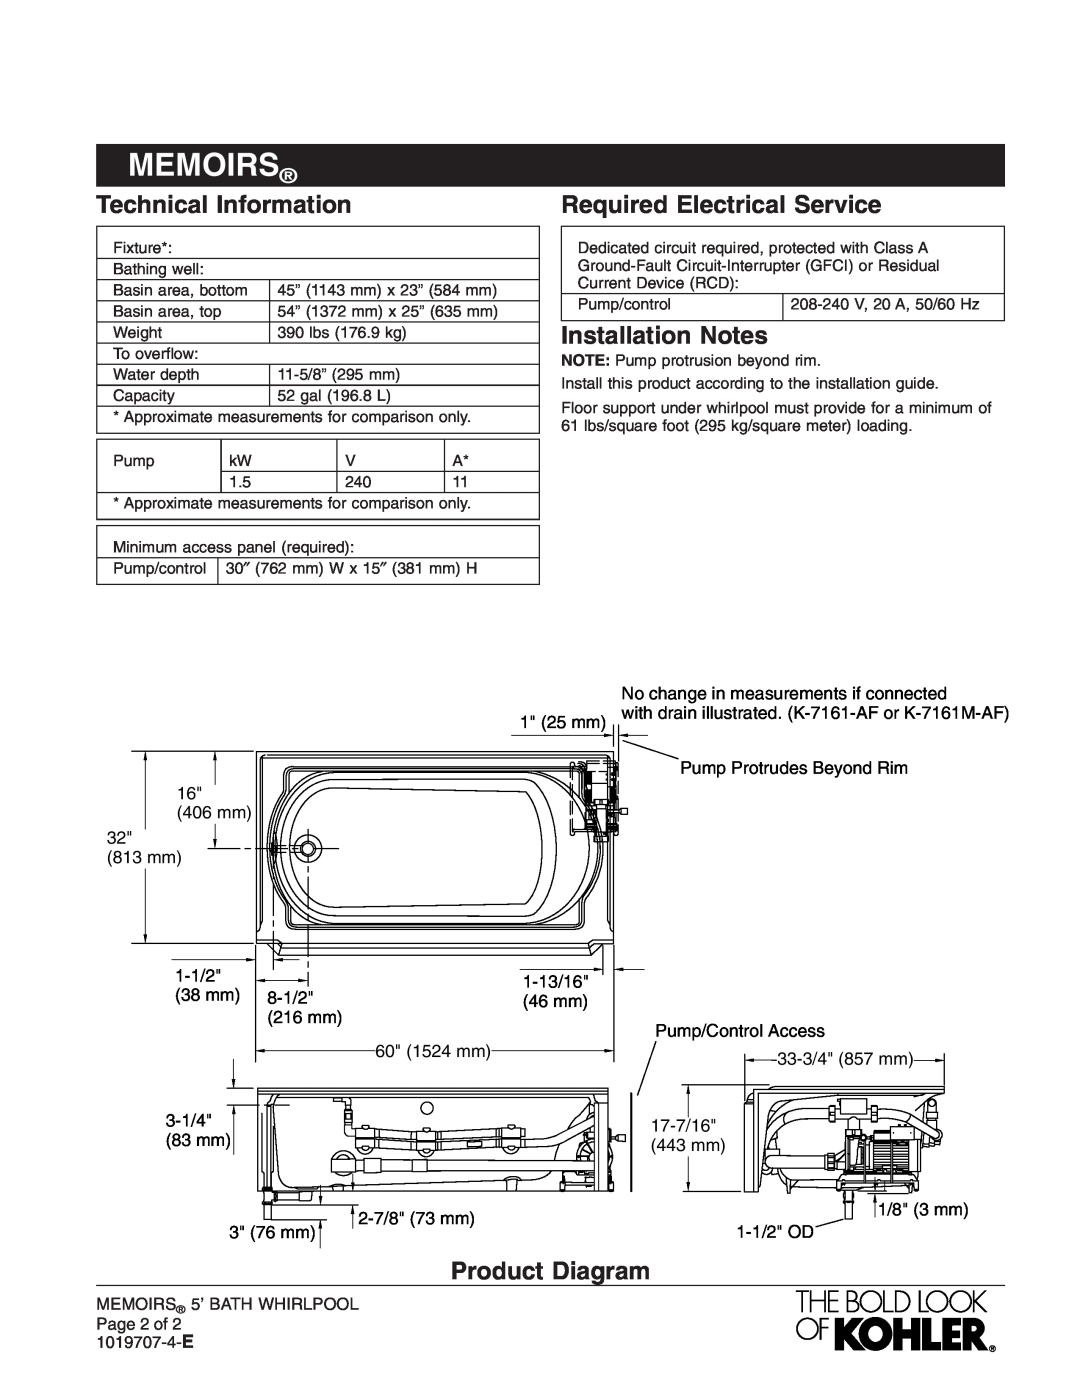 Kohler K-723-H2 manual Technical Information, Required Electrical Service, Installation Notes, Product Diagram, Memoirs 